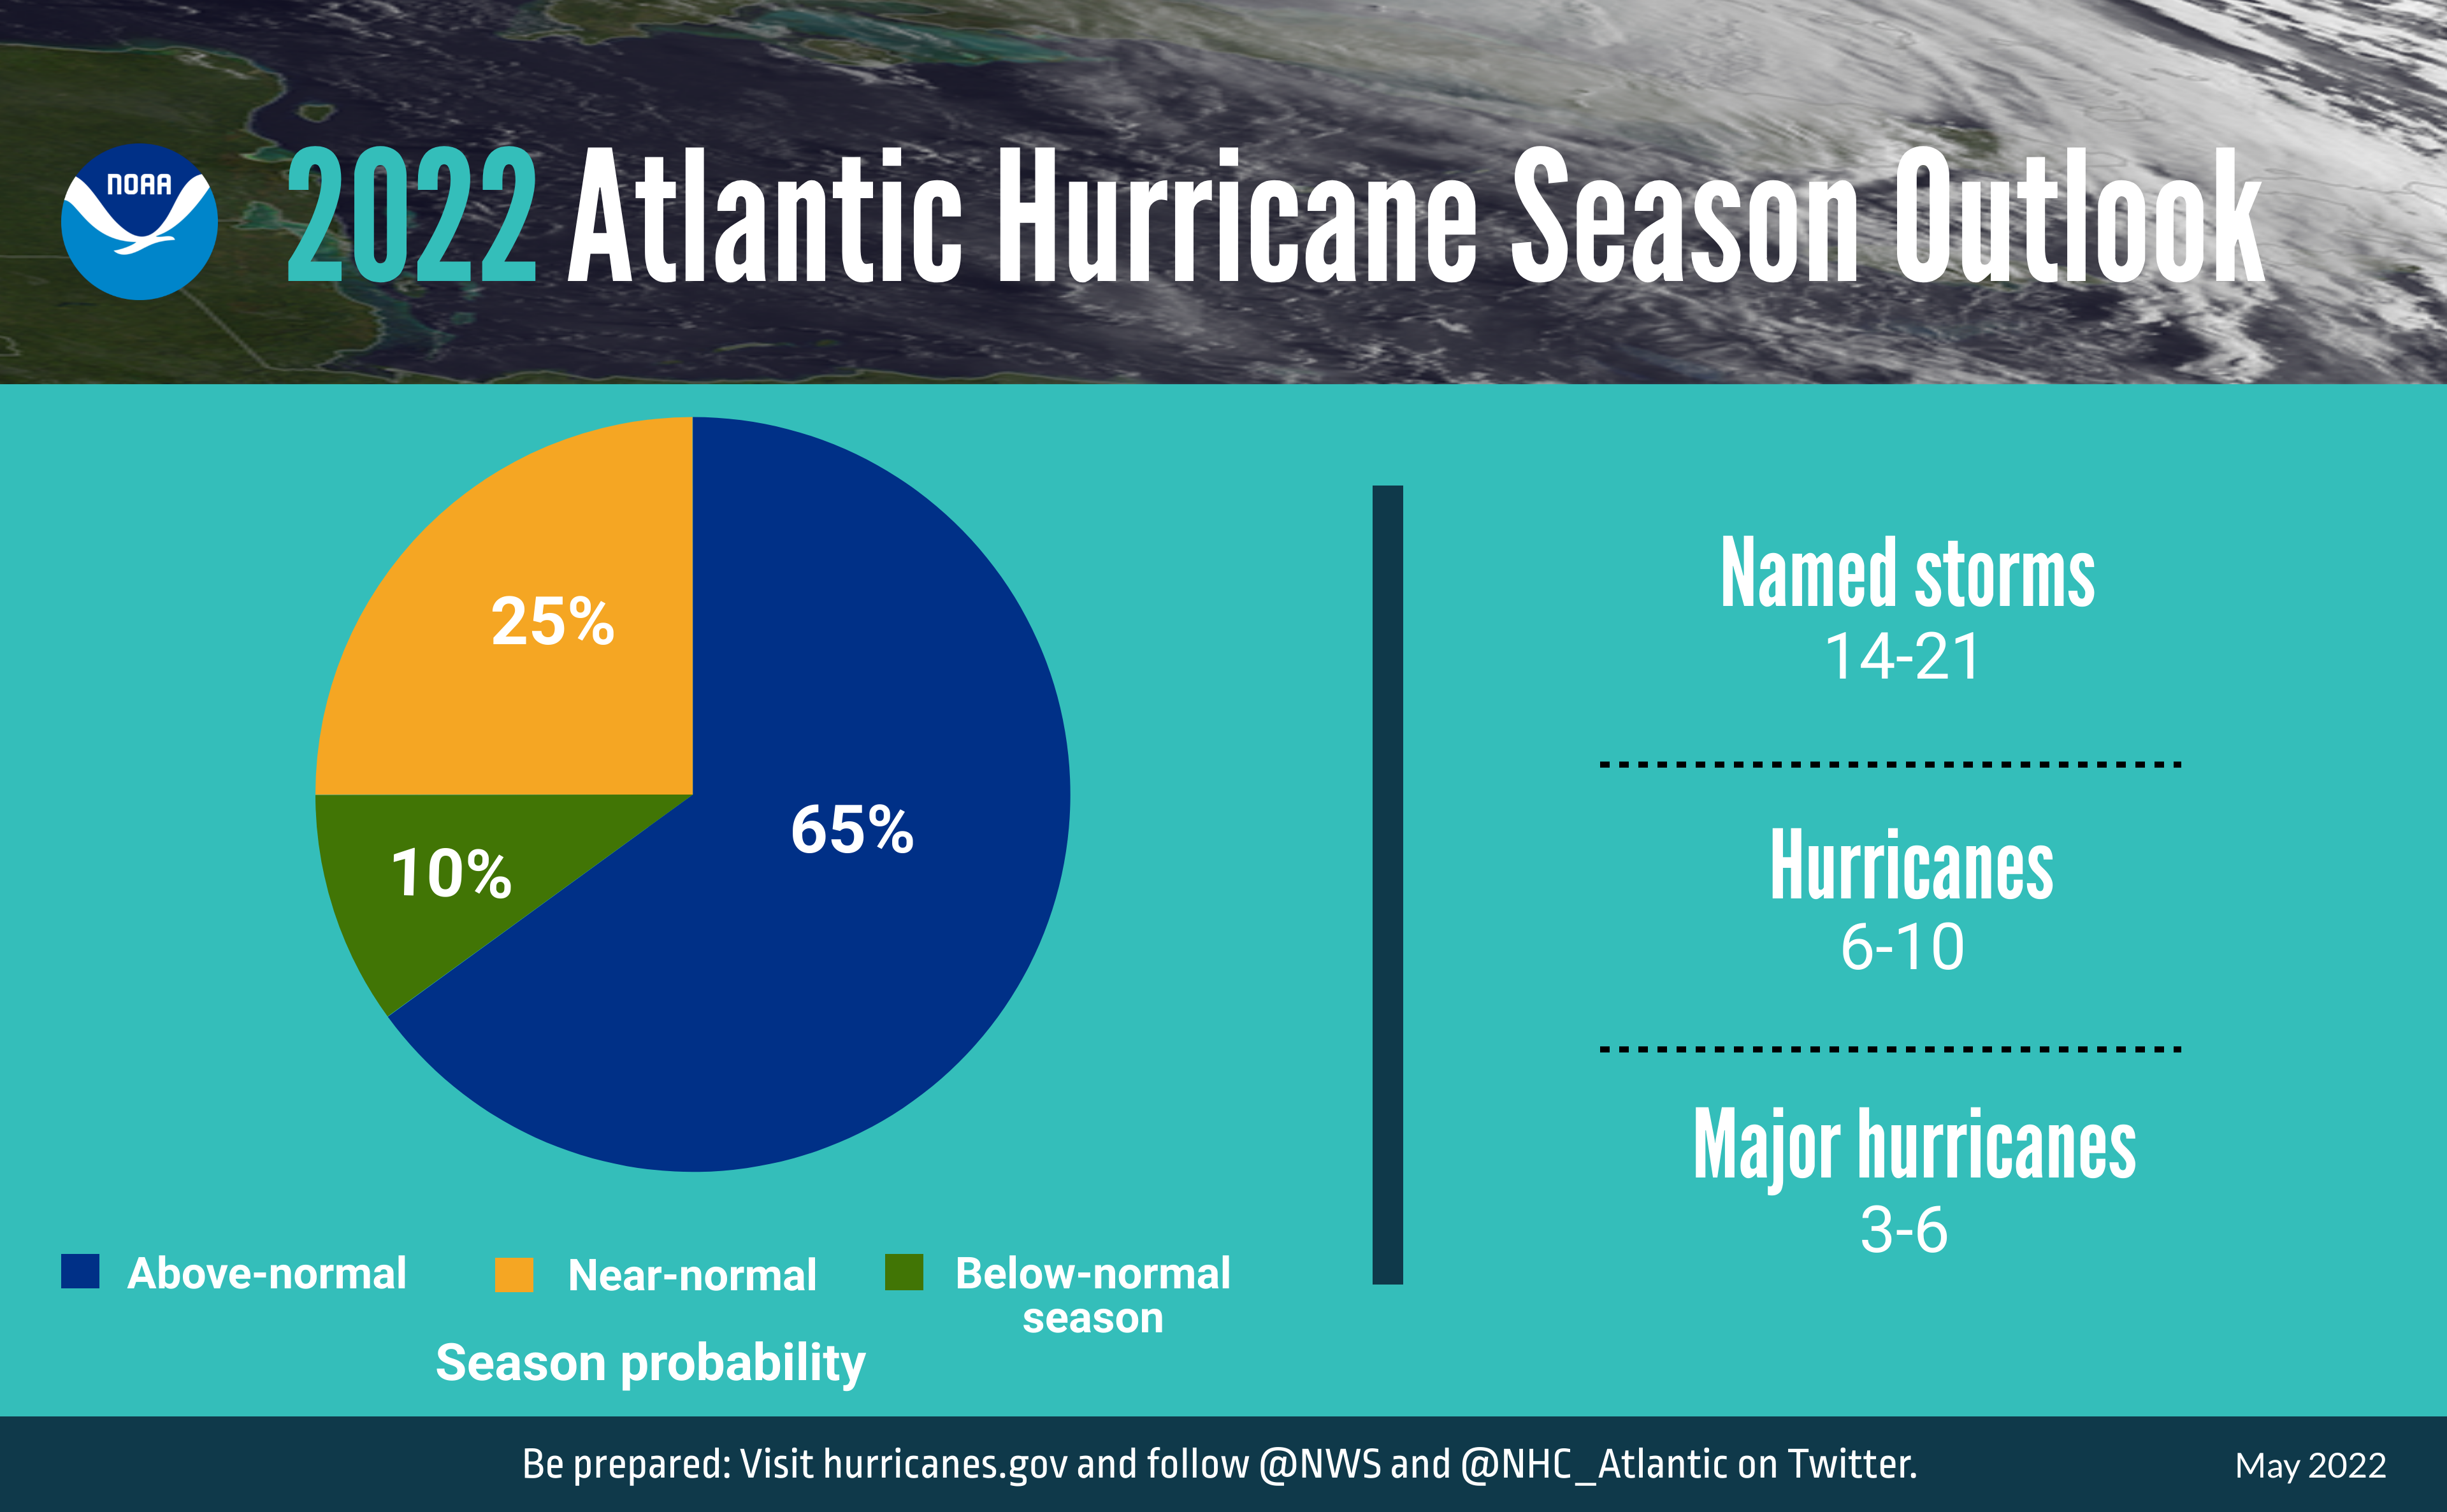 A summary infographic showing hurricane season probability and numbers of named storms predicted from NOAA's 2022 Atlantic Hurricane Season Outlook.